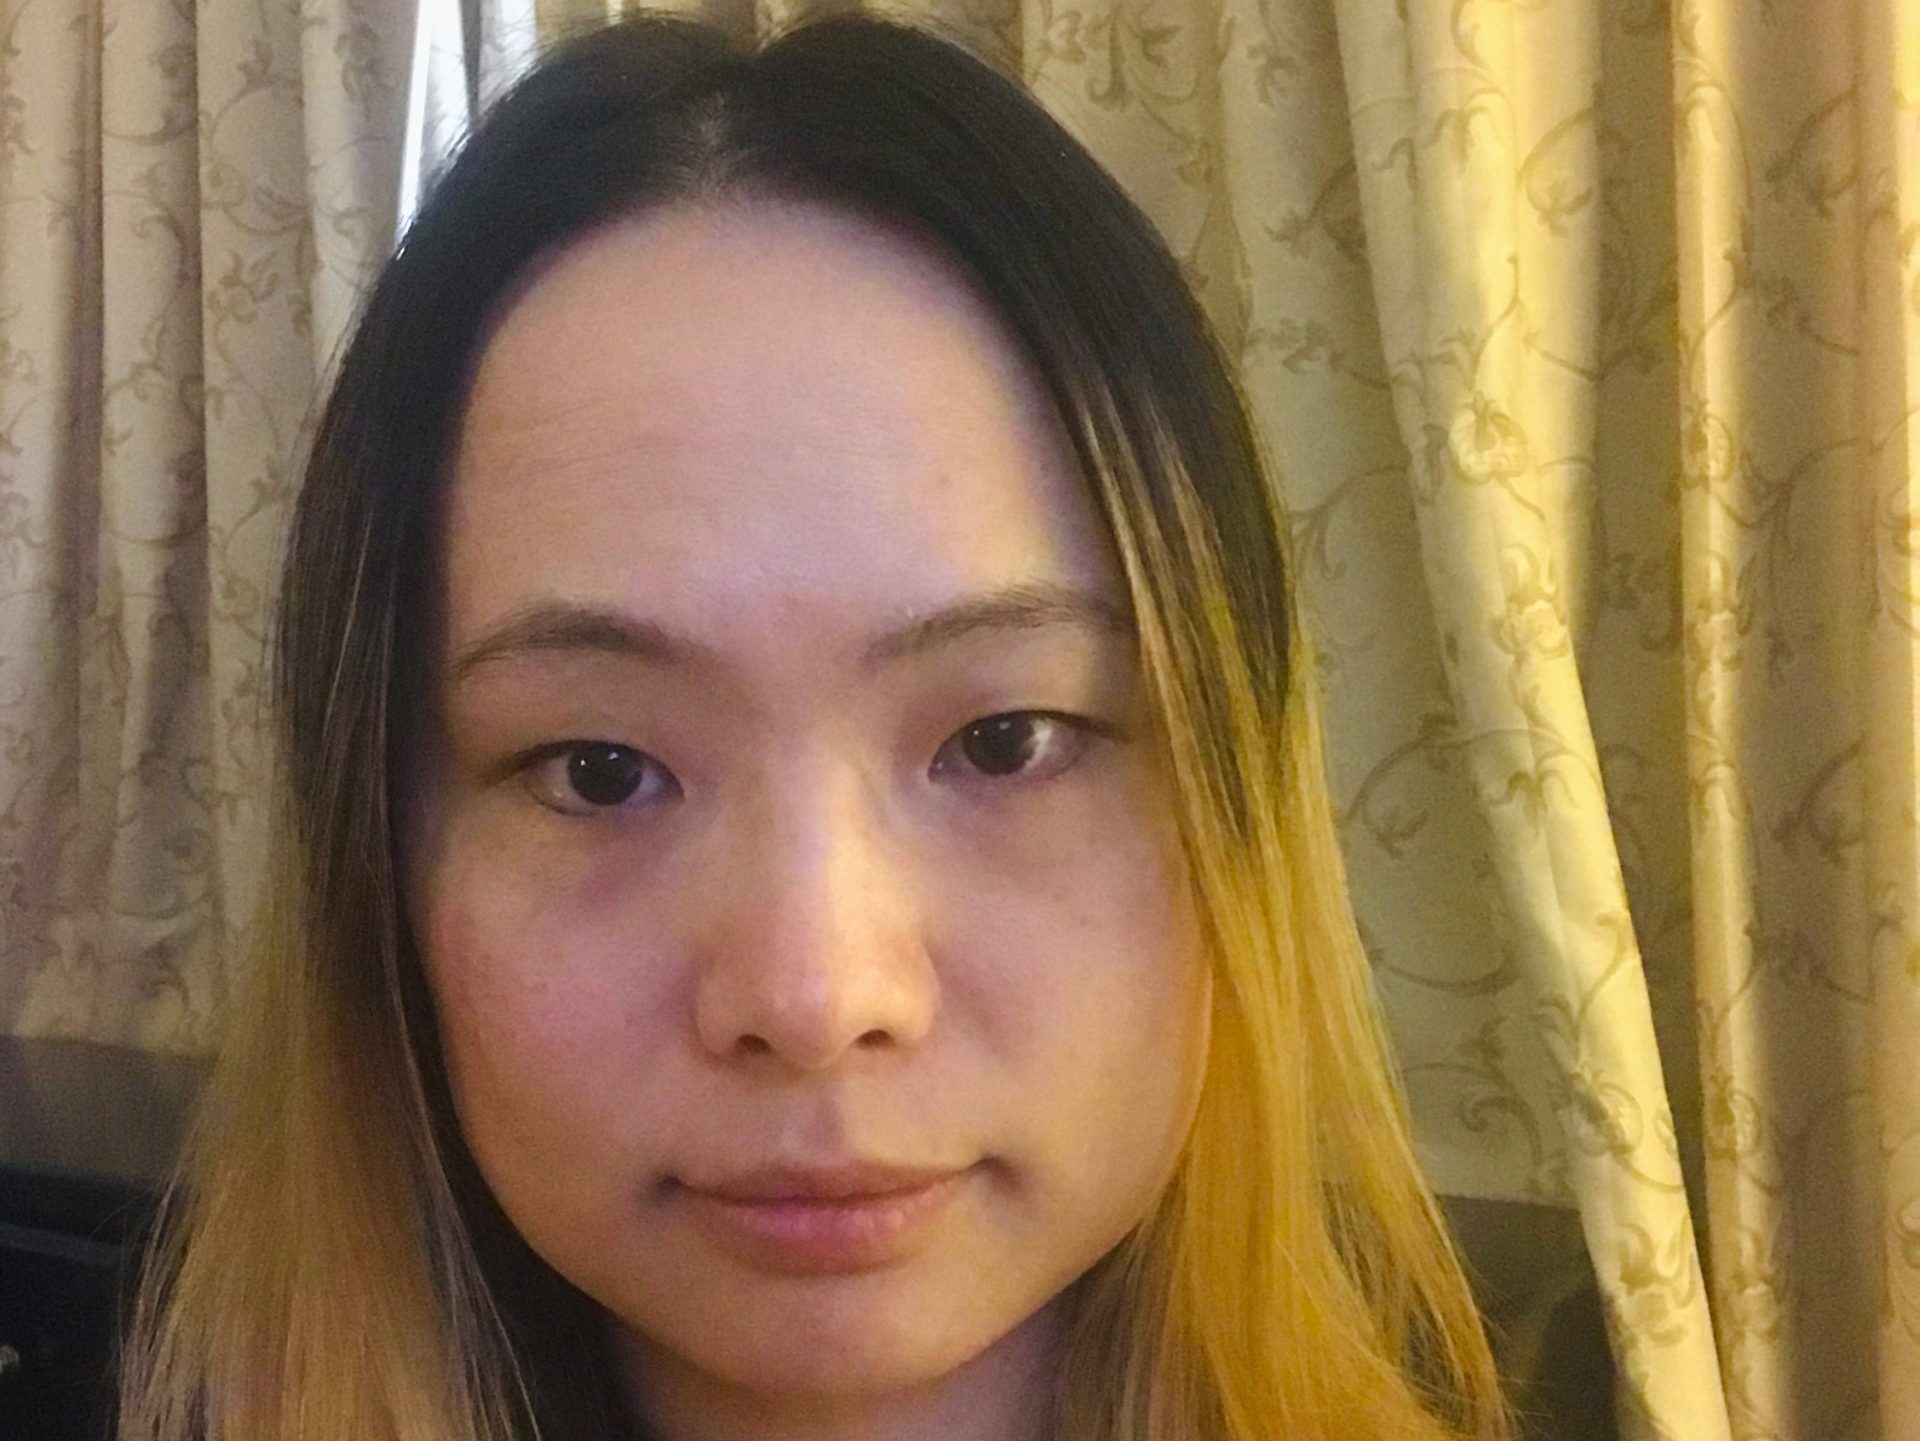 Ningxi Xu is investment manager in Jersey City. She is under quarantine for two weeks in California after returning from Wuhan, China.